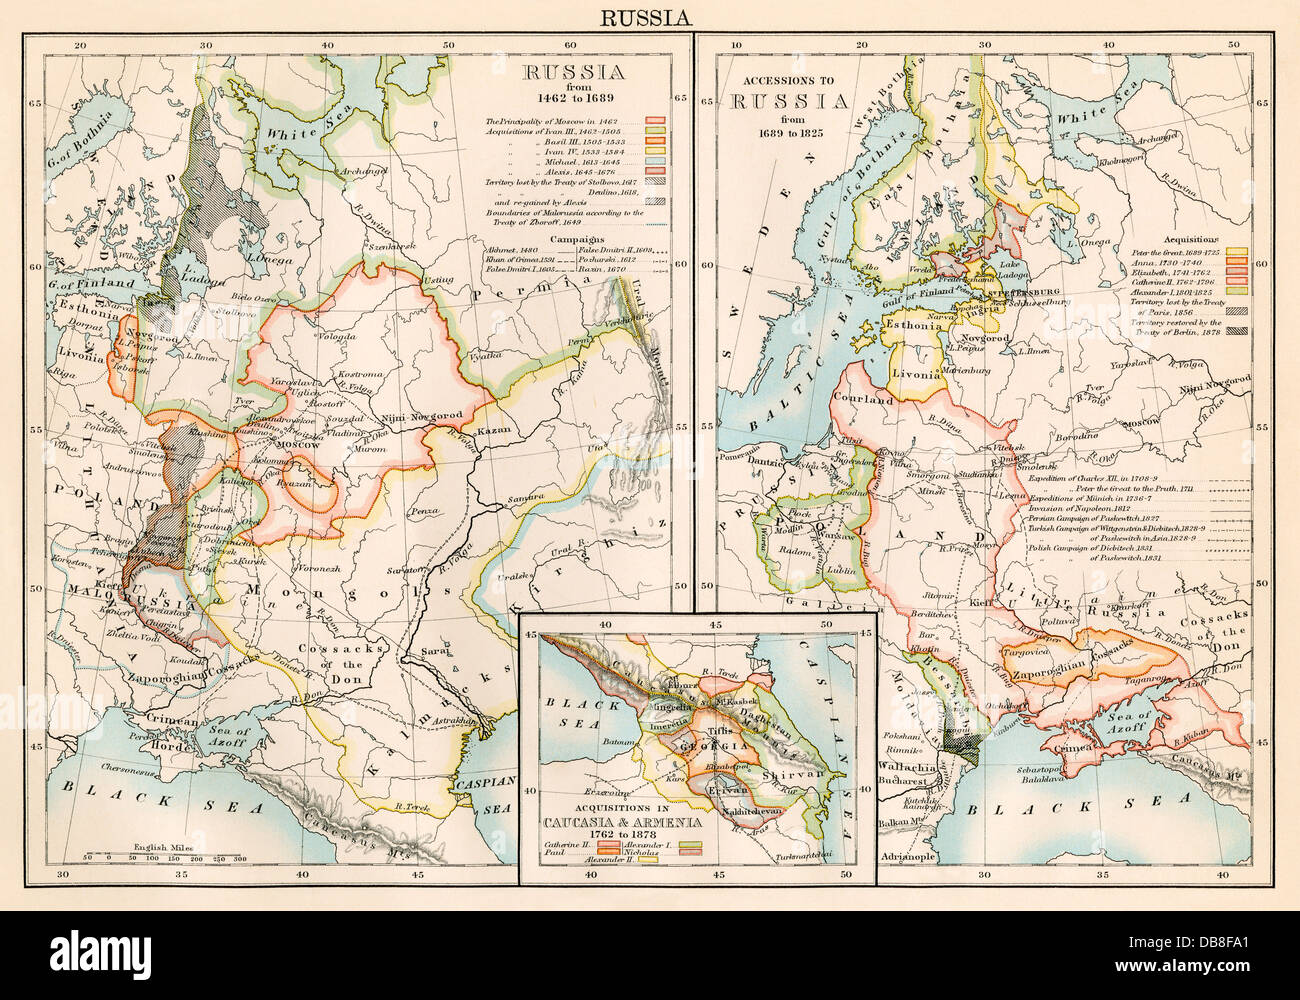 Russia 1462-1689 (left); lands added to Russian Empire 1689-1825 (right), plus Armenia and Caucasia (inset). Color lithograph Stock Photo